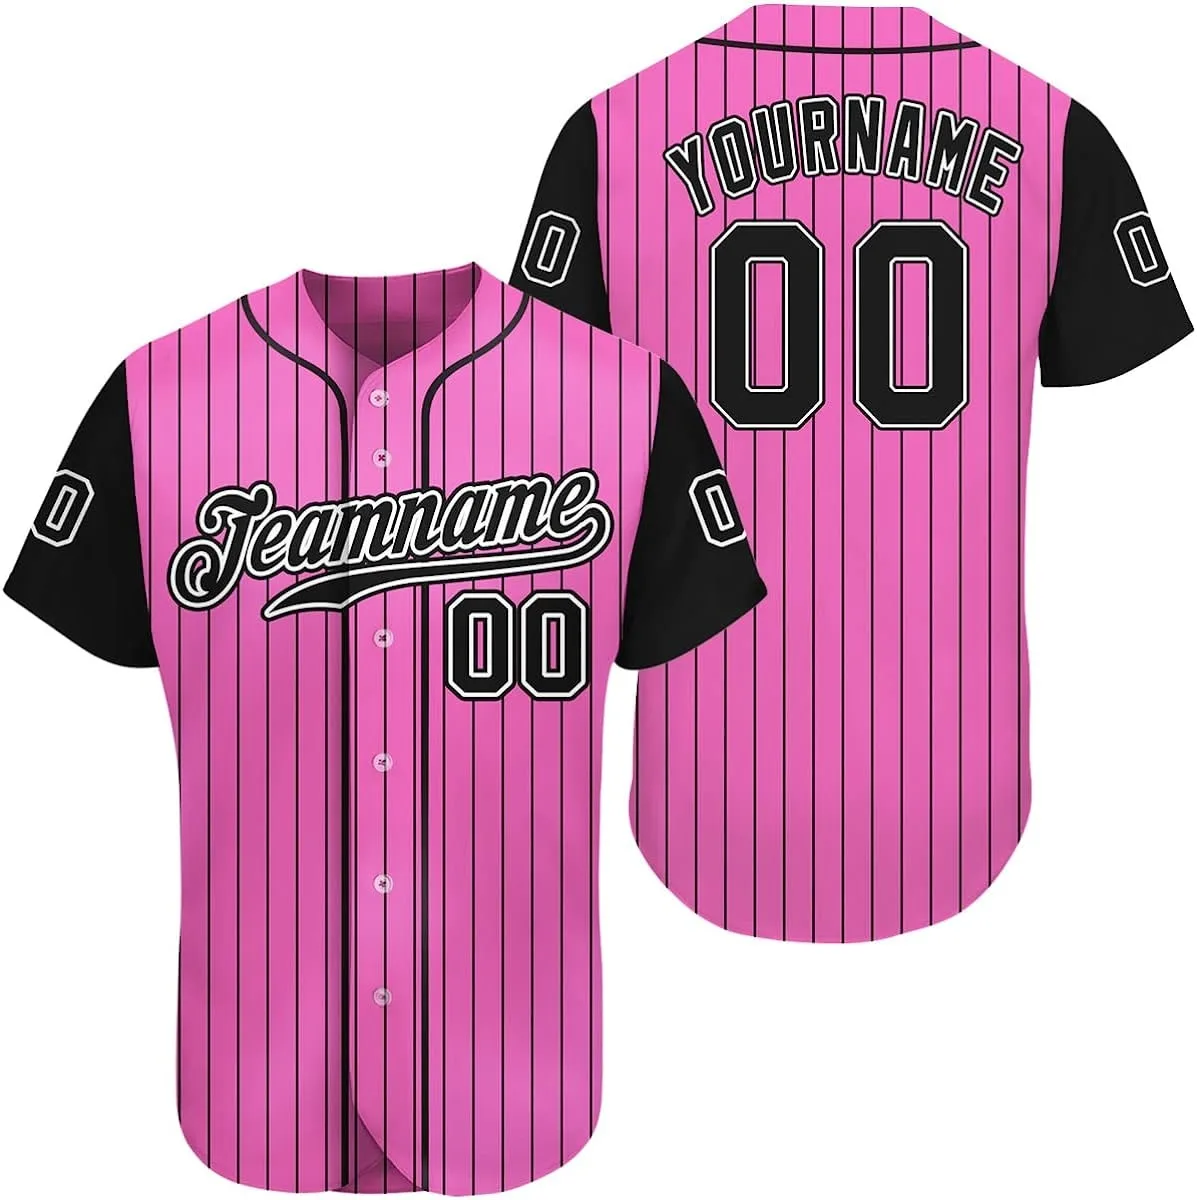 Source New 2022 Top selling quick dry 160-180 interlock fabric softball  jersey for men Fully sublimated baseball jerseys for youth on m.